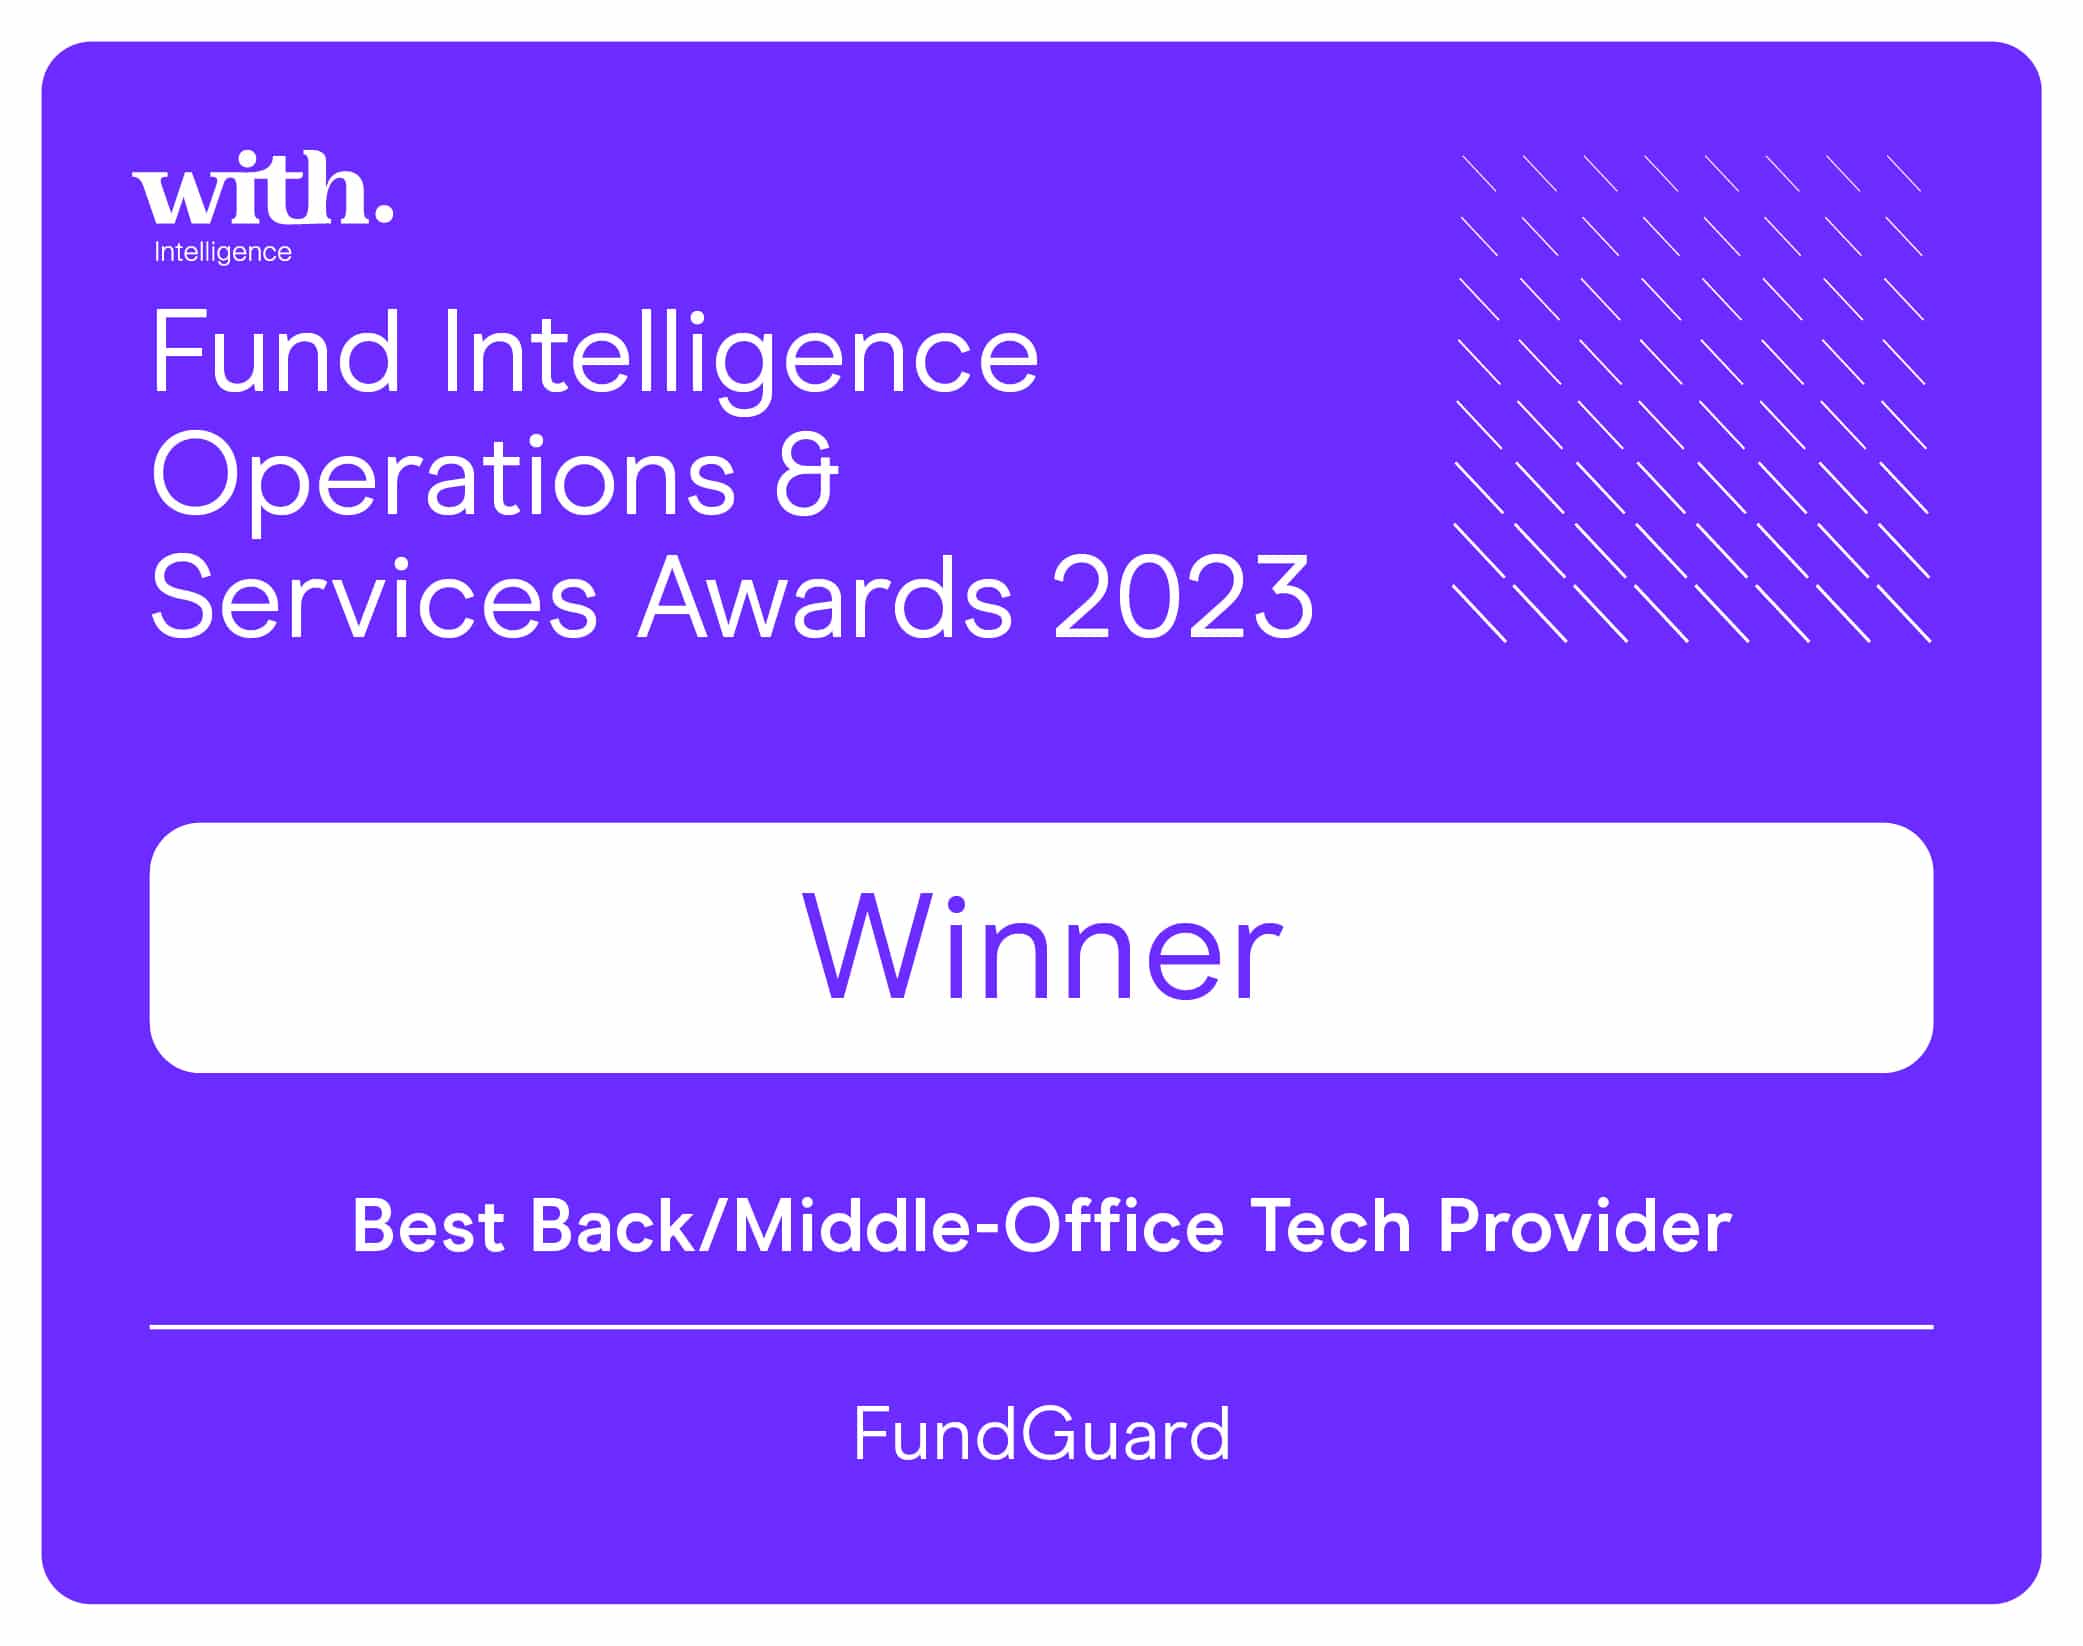 FundGuard Wins Best Back/Middle Office Tech Provider at the Fund Intelligence Operations and Services Awards